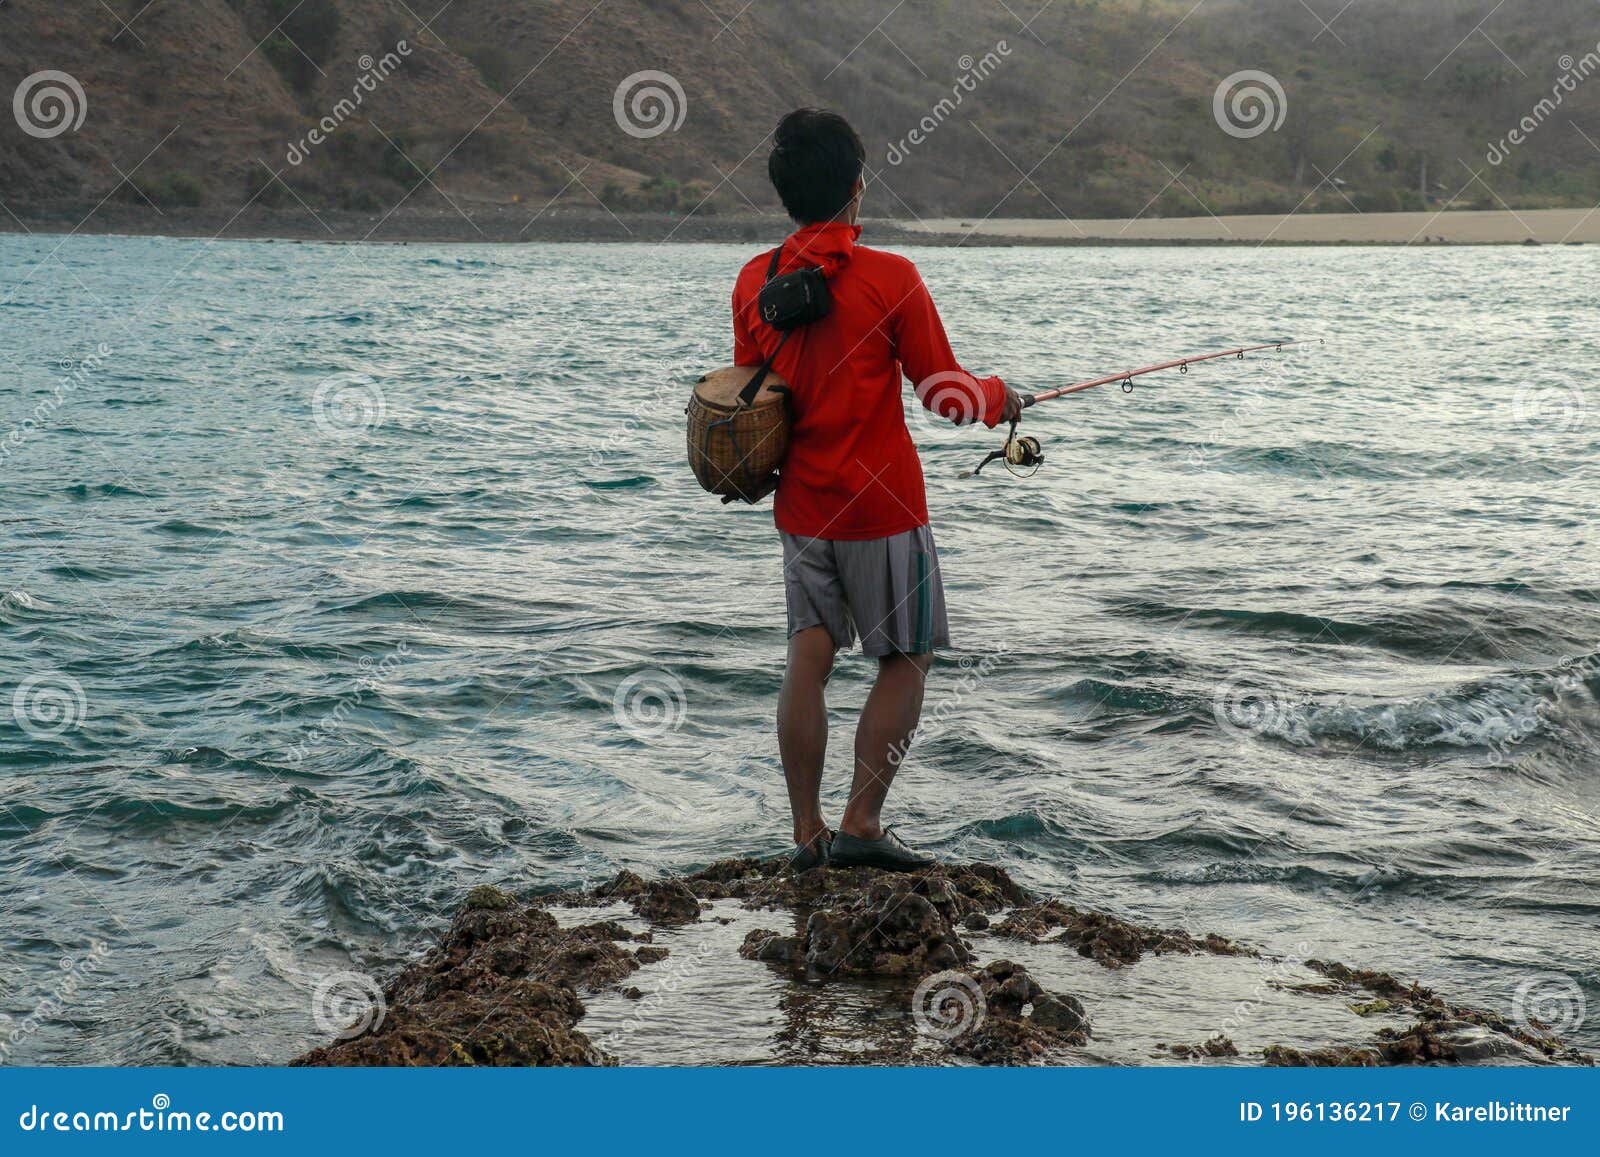 Fishermen Catch Fish at Low Tide. View from the Back of Guy with Fishing  Rods in the Water Stock Image - Image of nature, calmness: 196136217